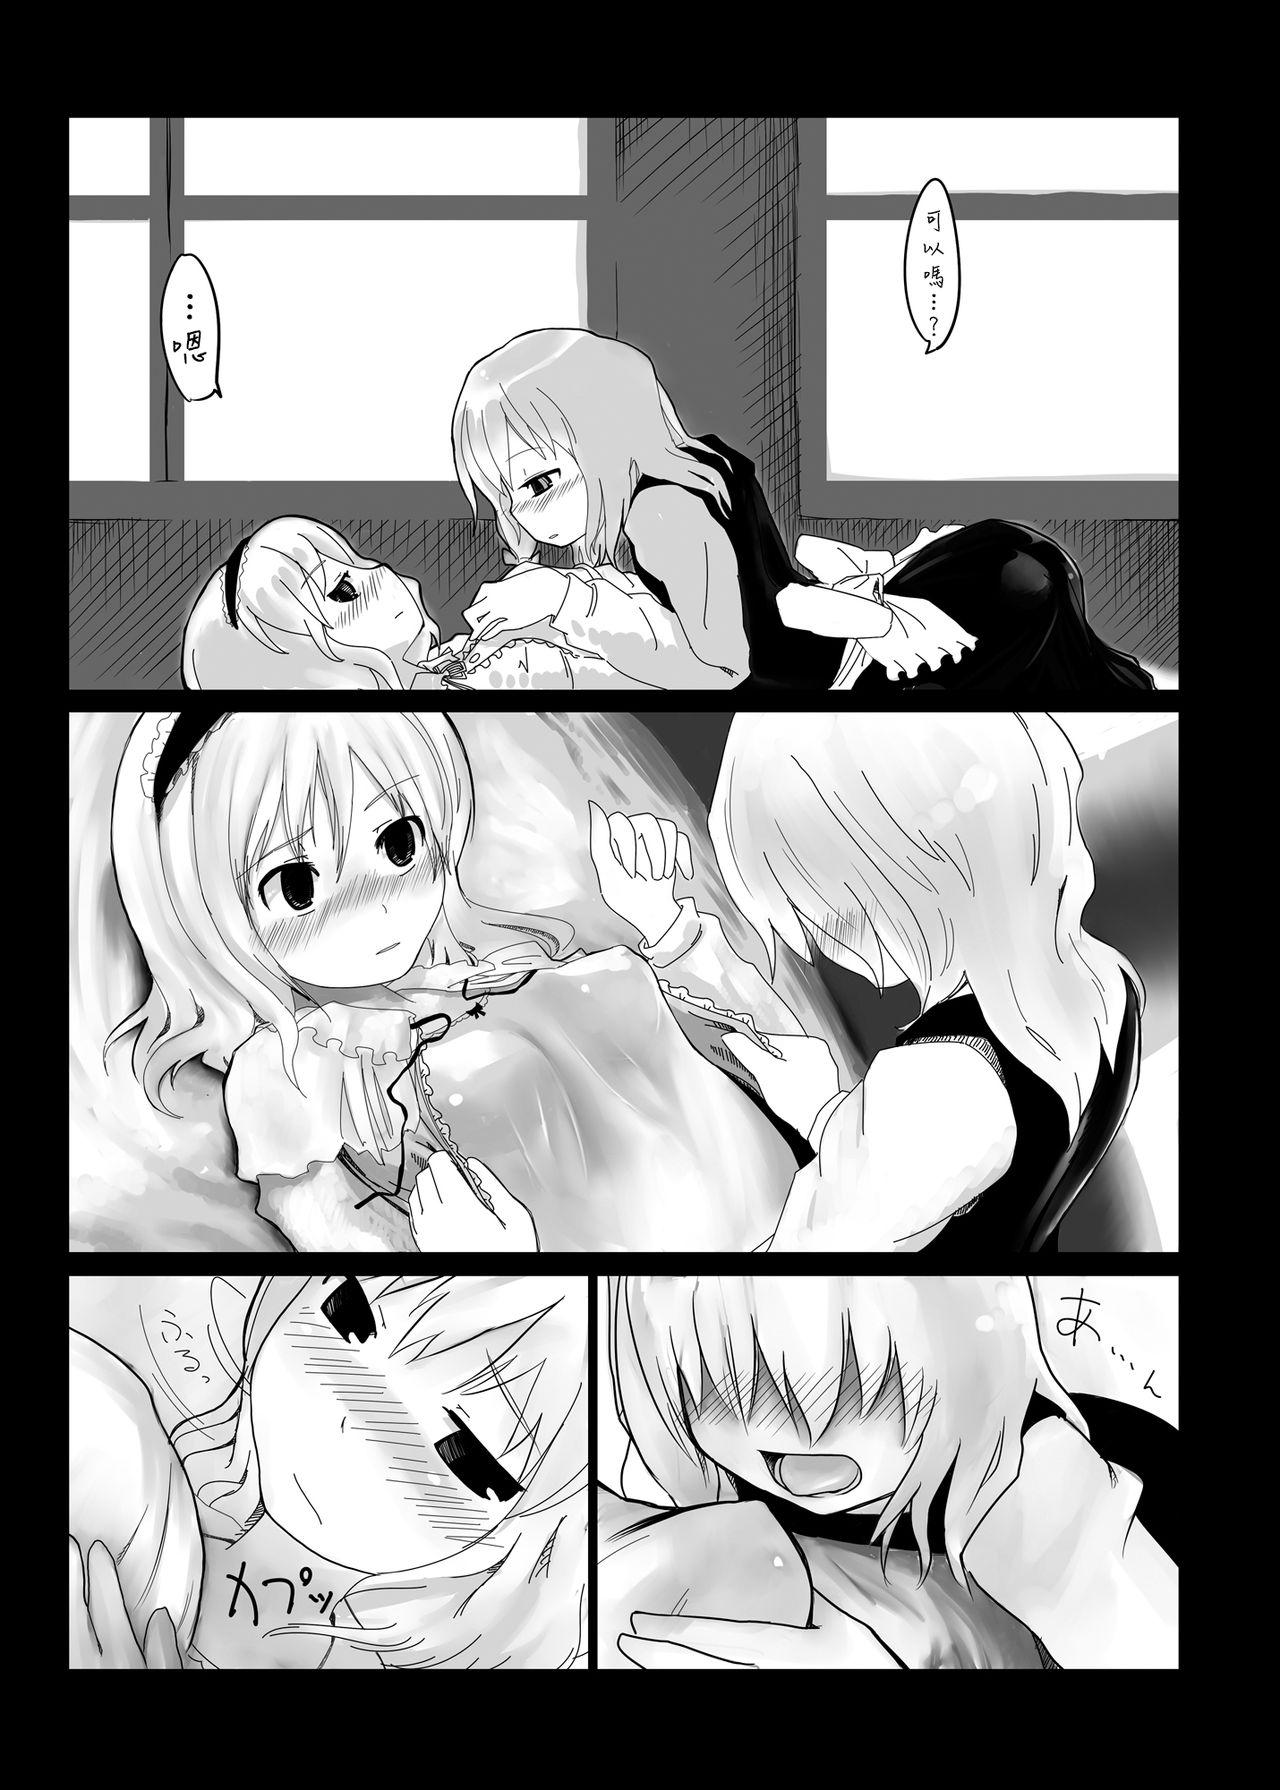 Sexcams Touhou Ero Atsume. - Touhou project Real Orgasm - Page 7